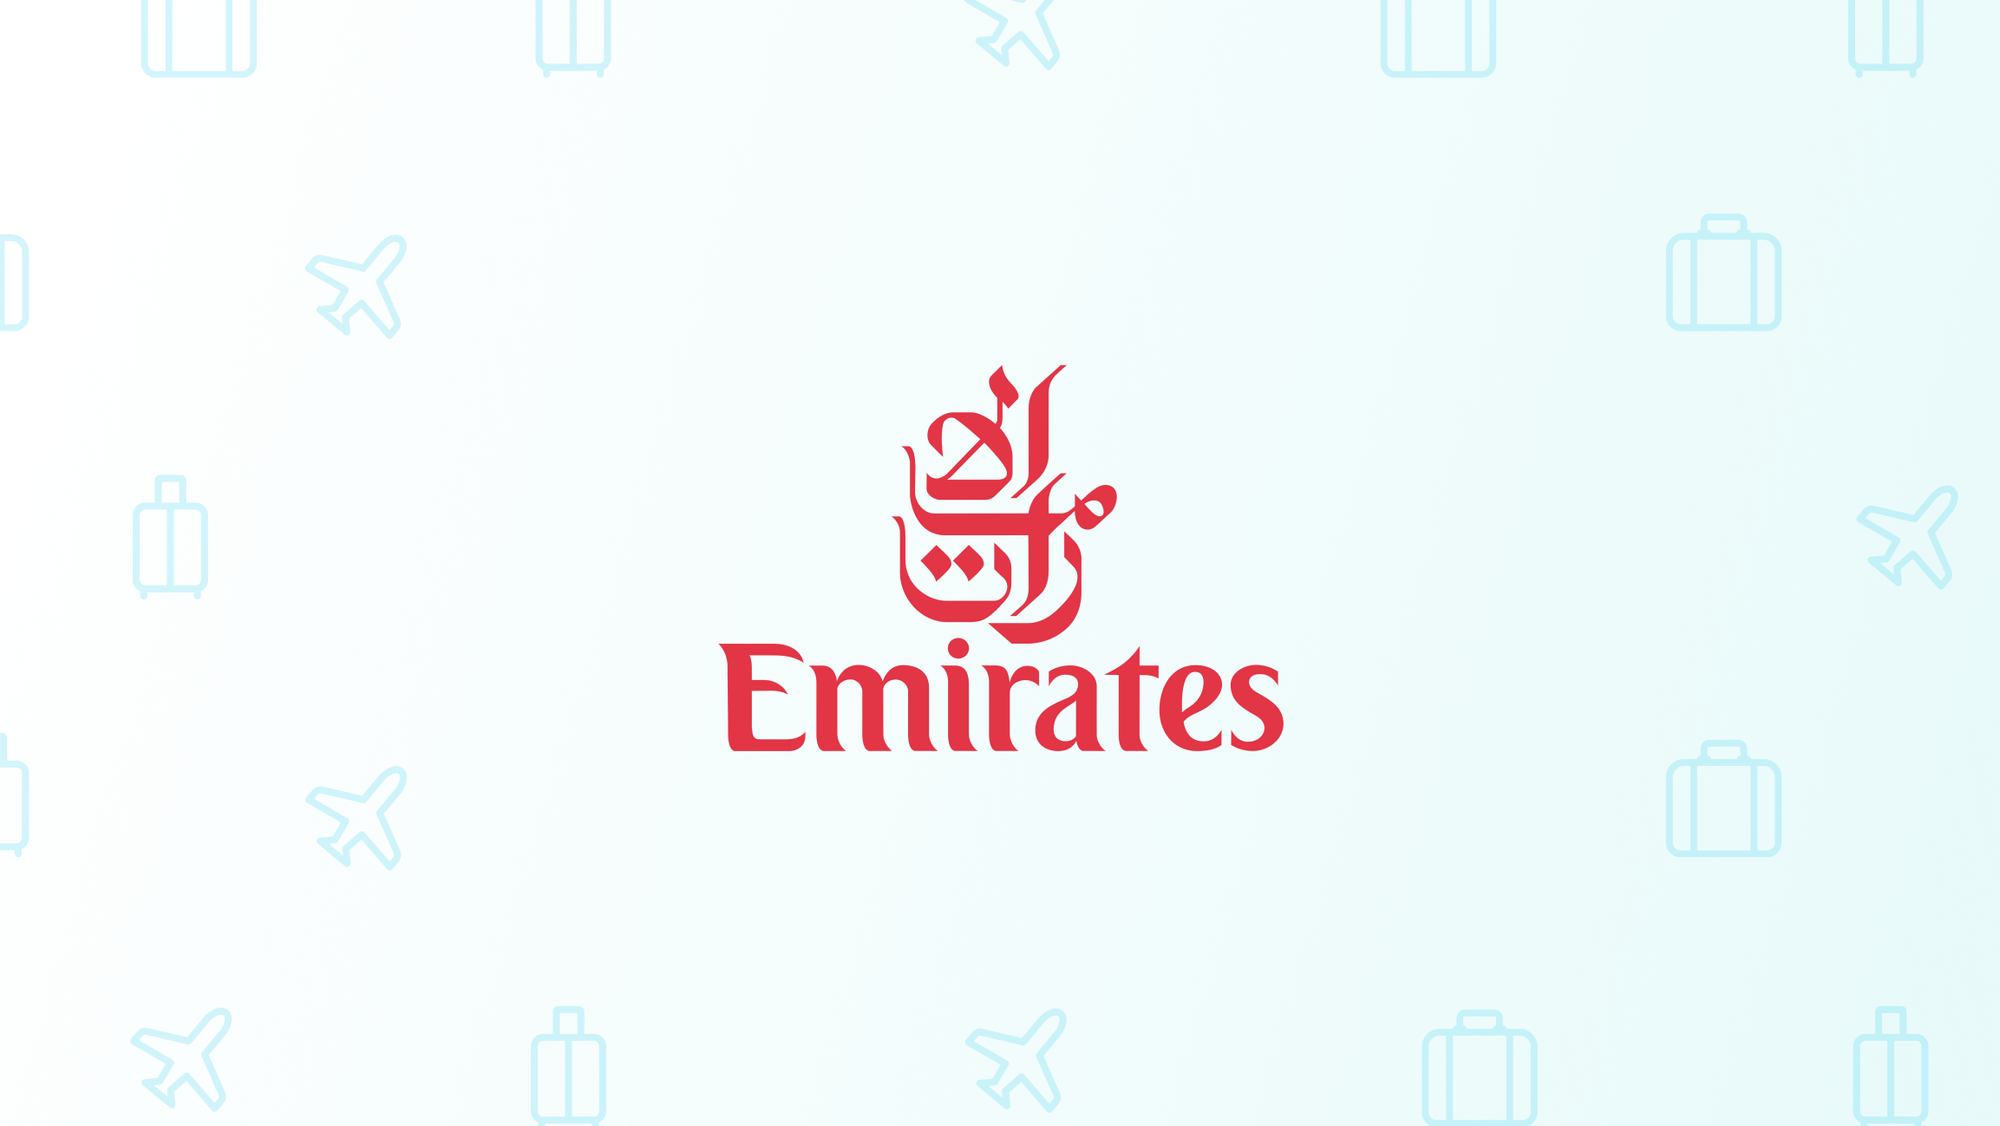 MENA Airlines Loyalty Programs - A Goldmine For Corporate Travel